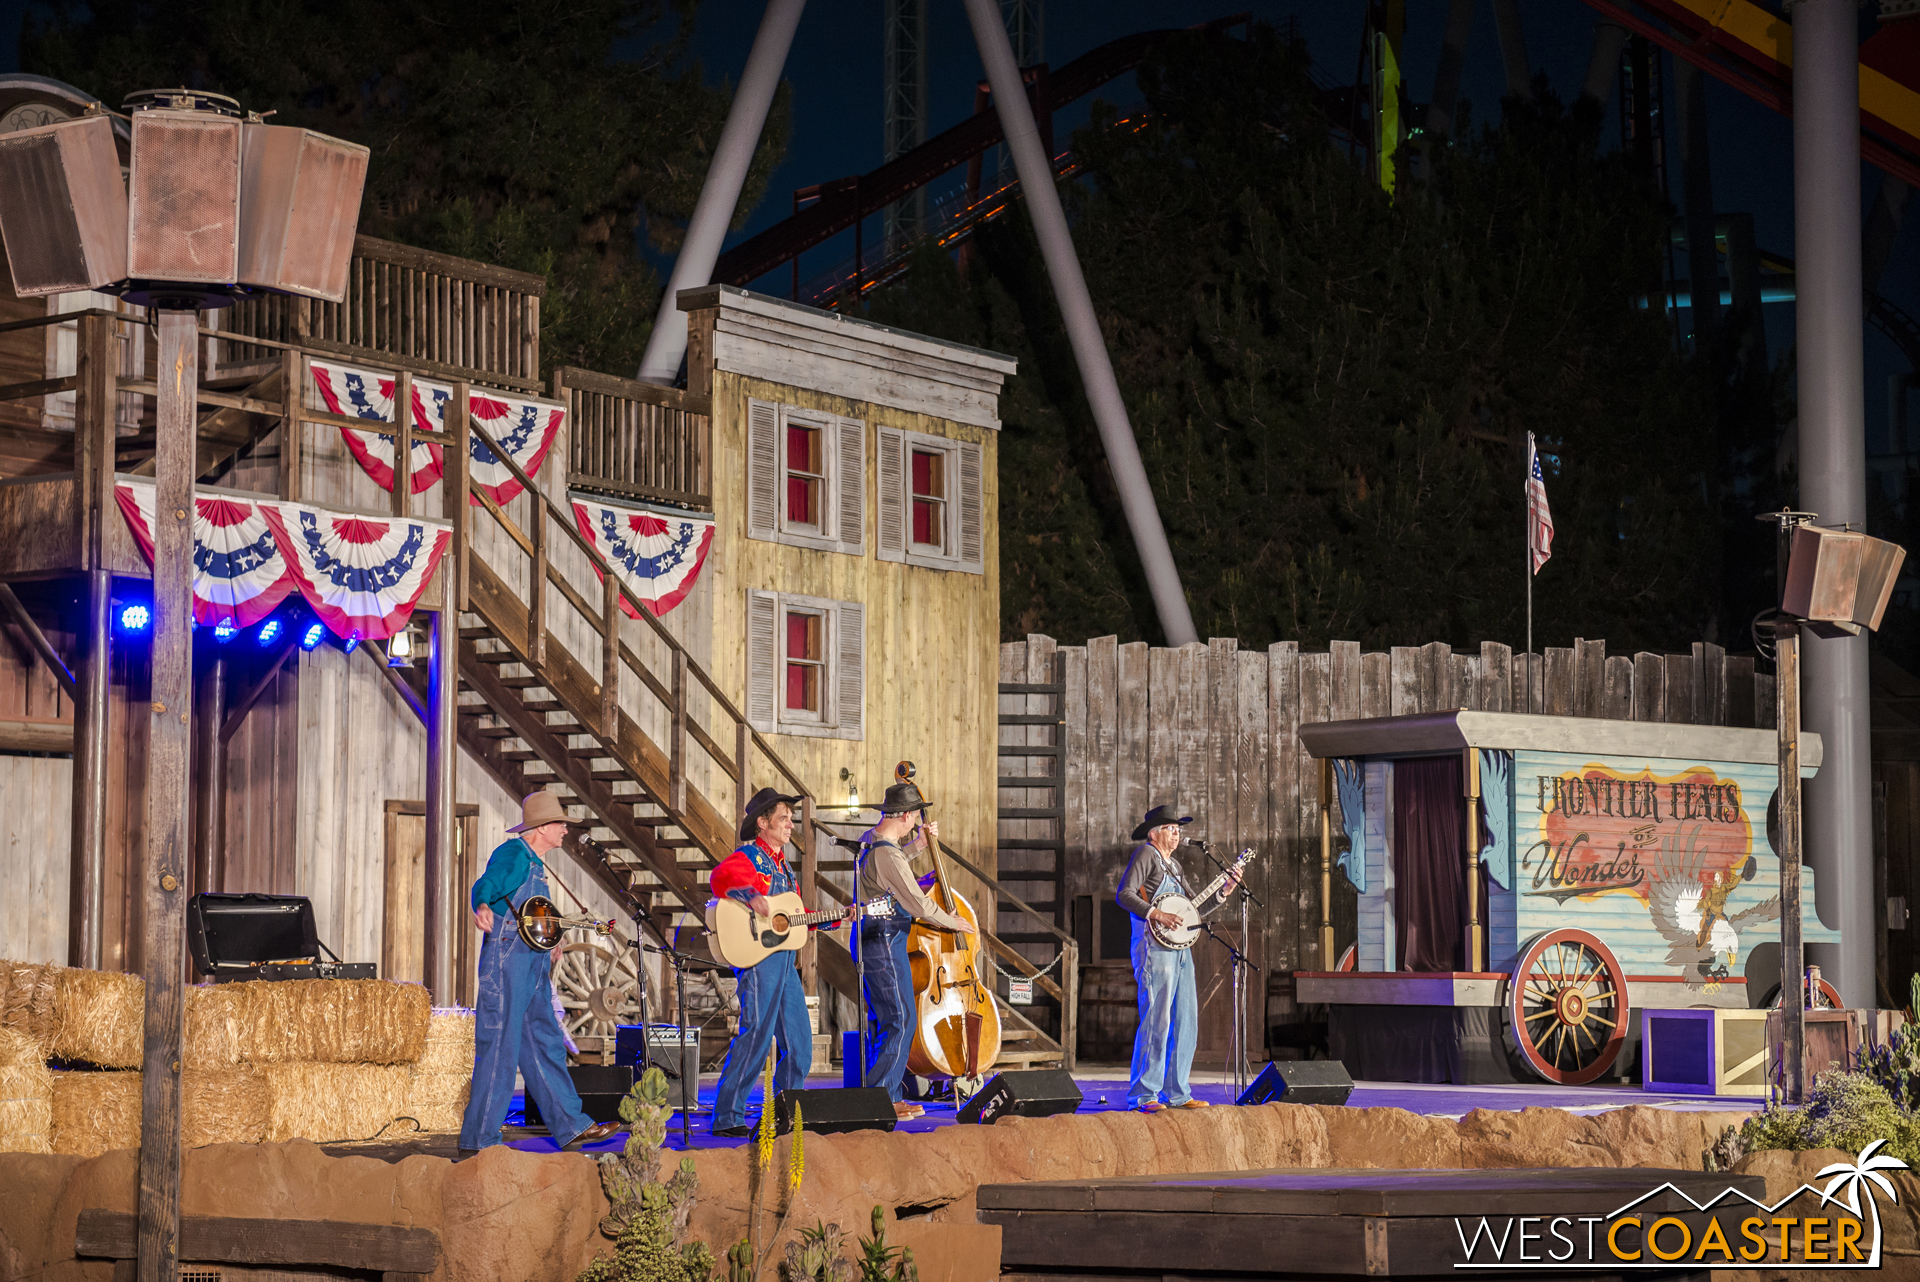  These talented musicians have imported their act from Disneyland over to Knott's and have found quite a bit of success in the three years they've been performing at the Farm. 